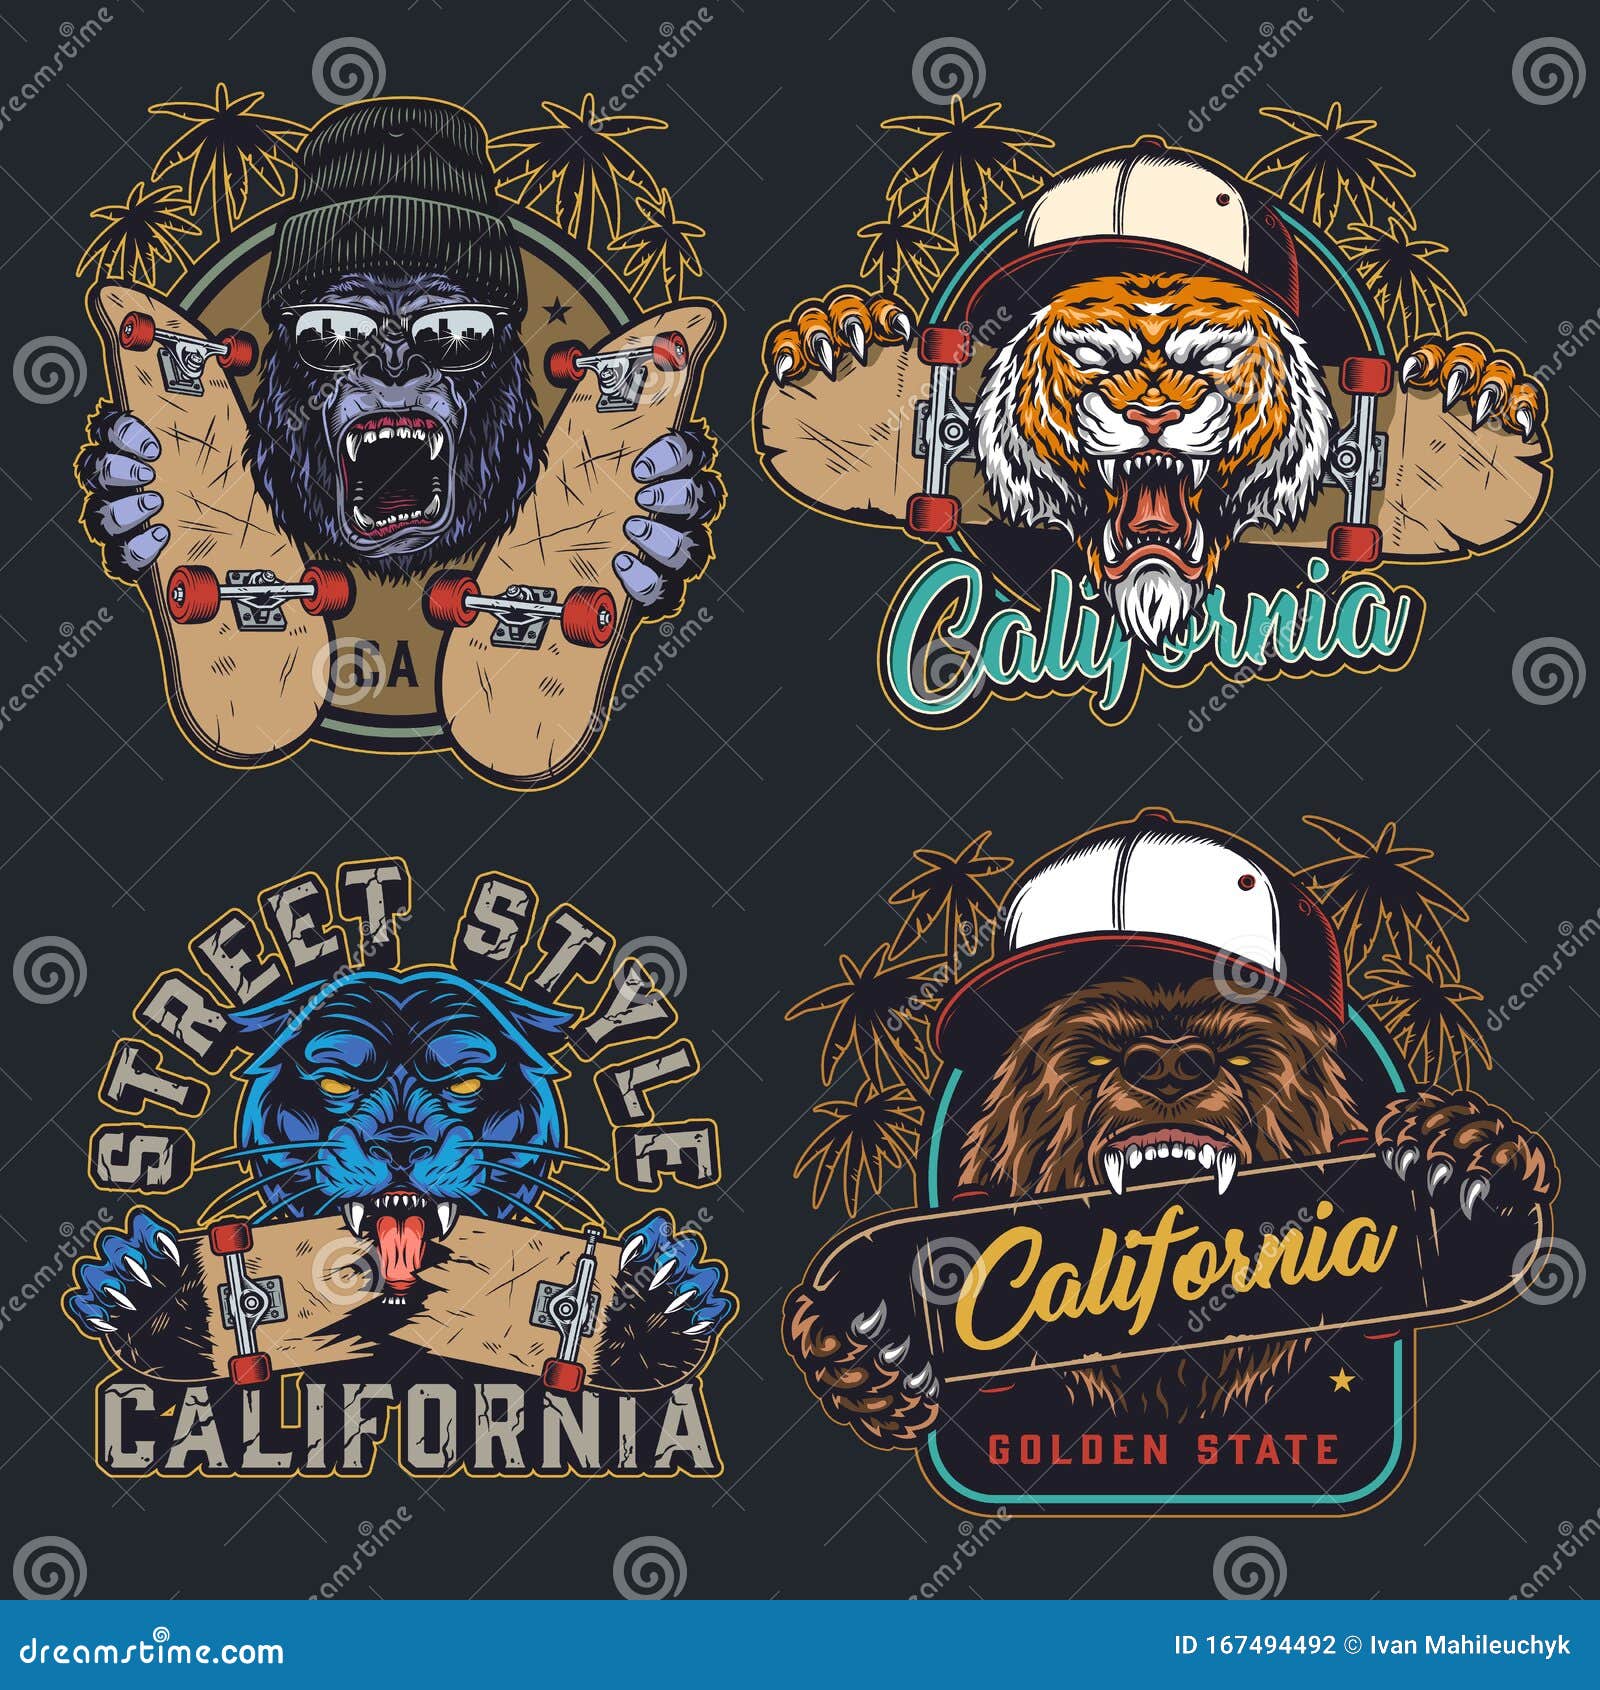 cruel animals and skateboards colorful emblems